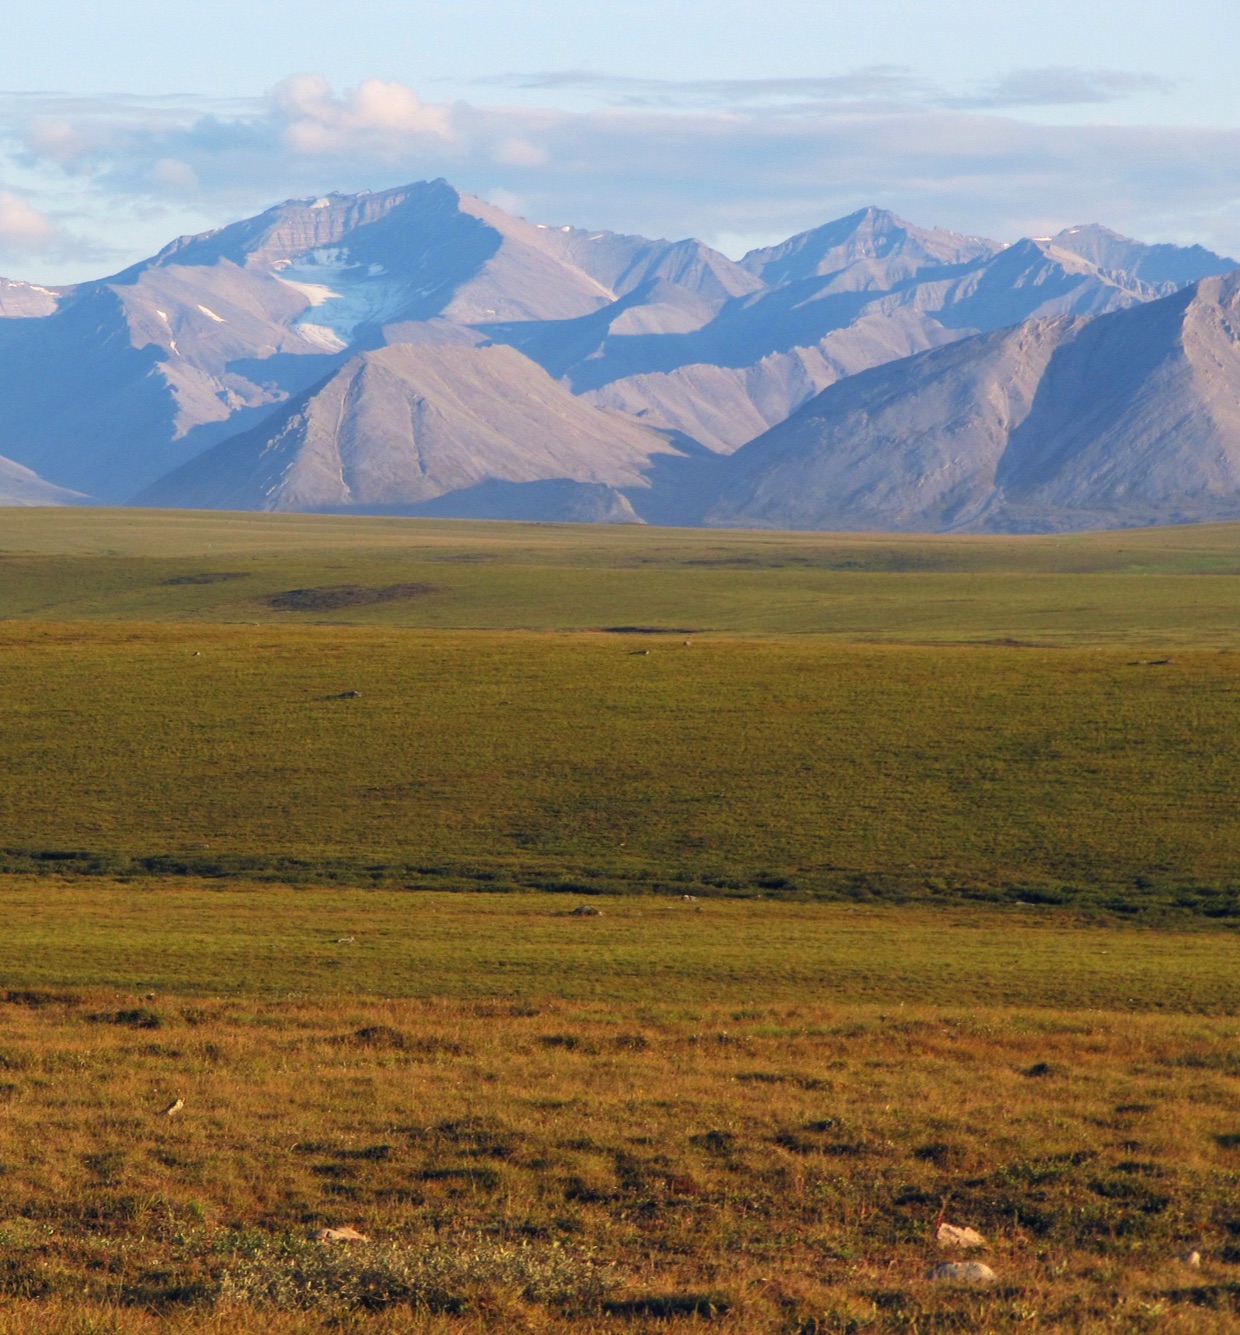 Study links climate policy, carbon emissions from permafrost